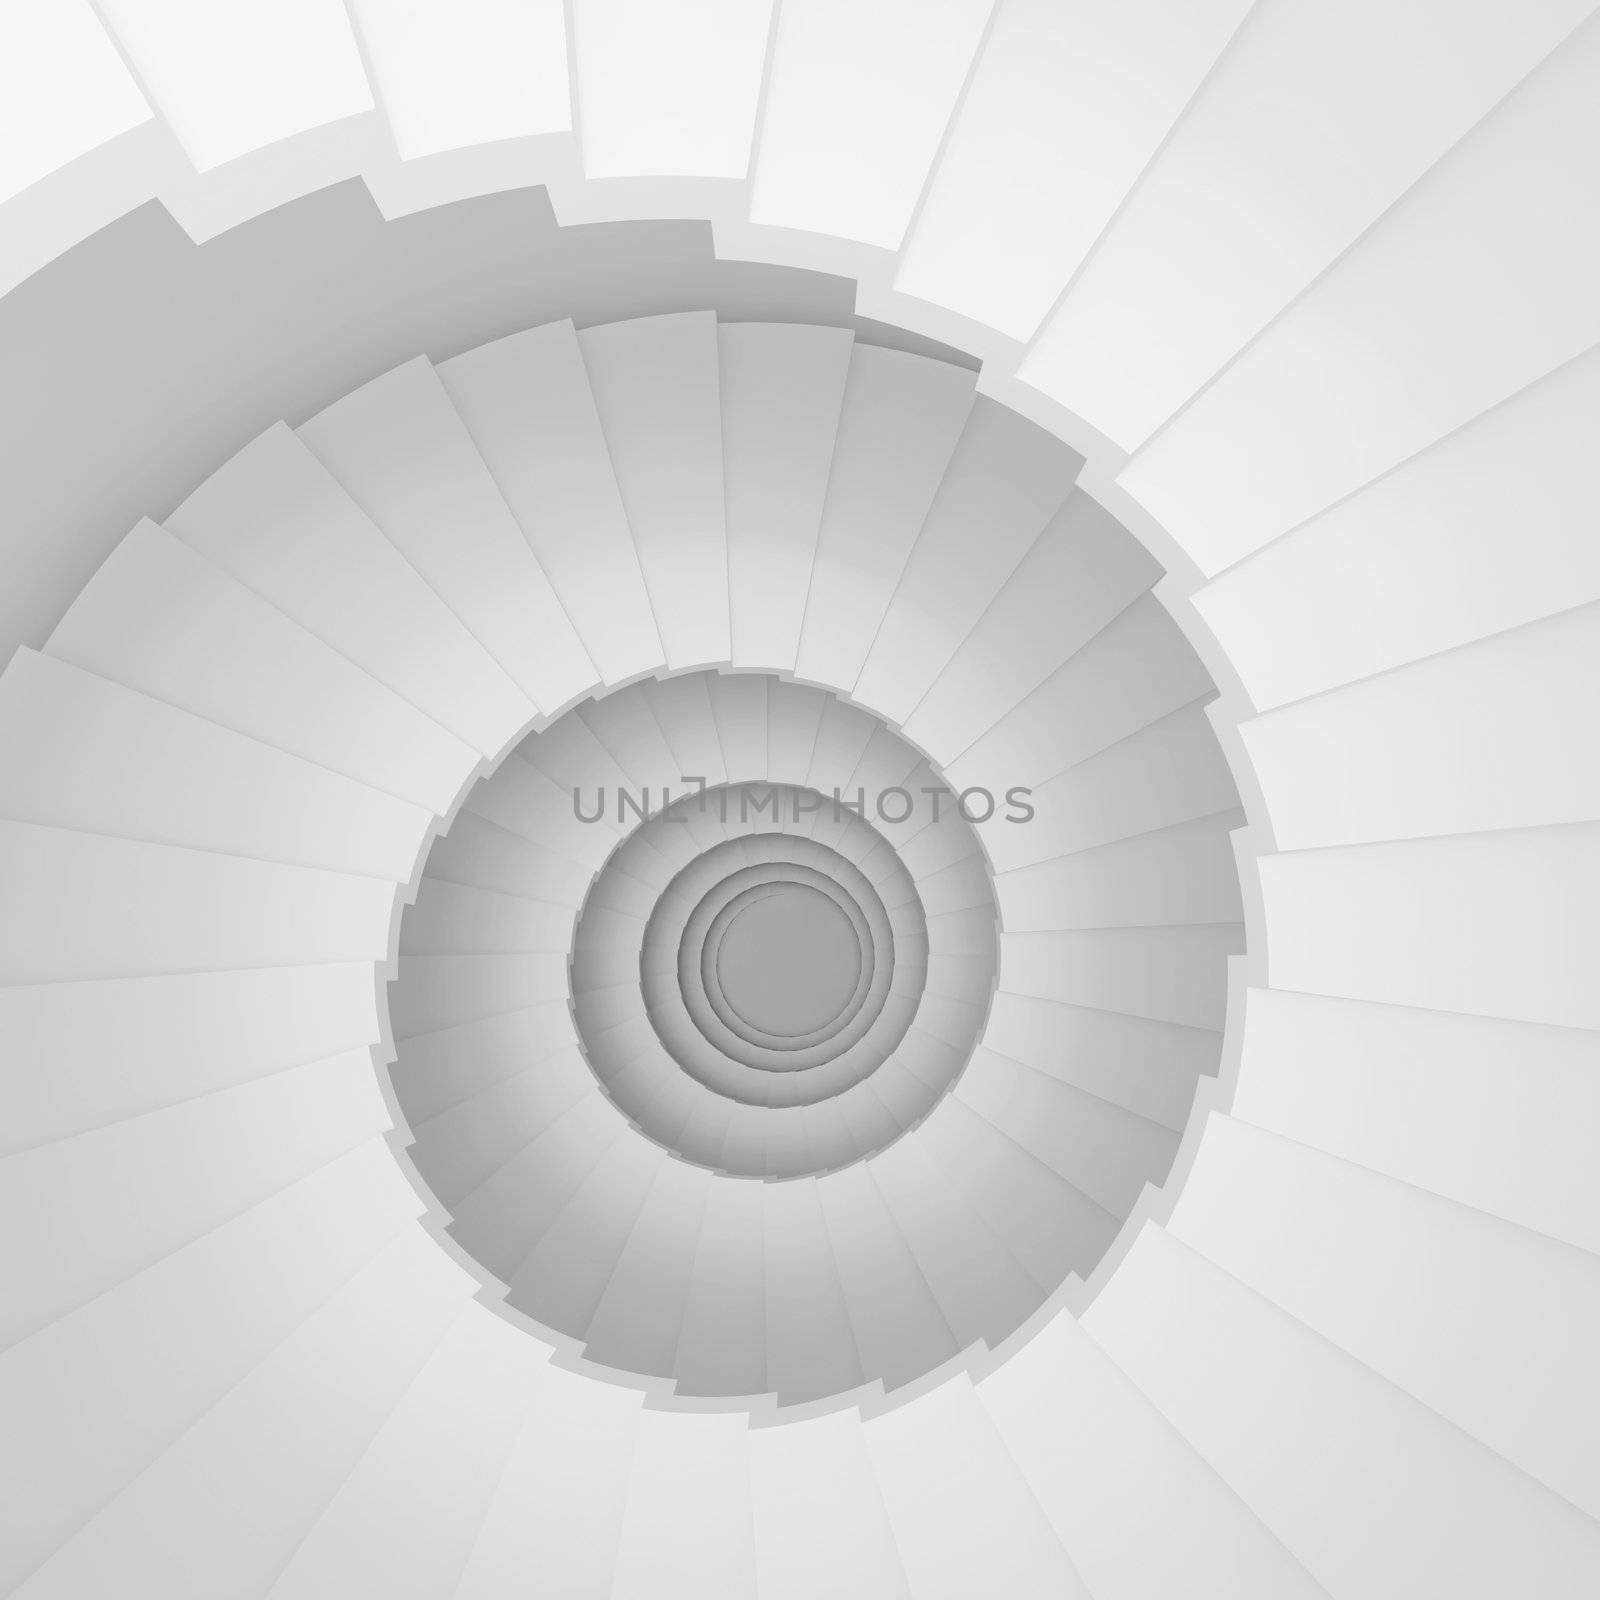 3d Illustration of White Abstract Staircase Background